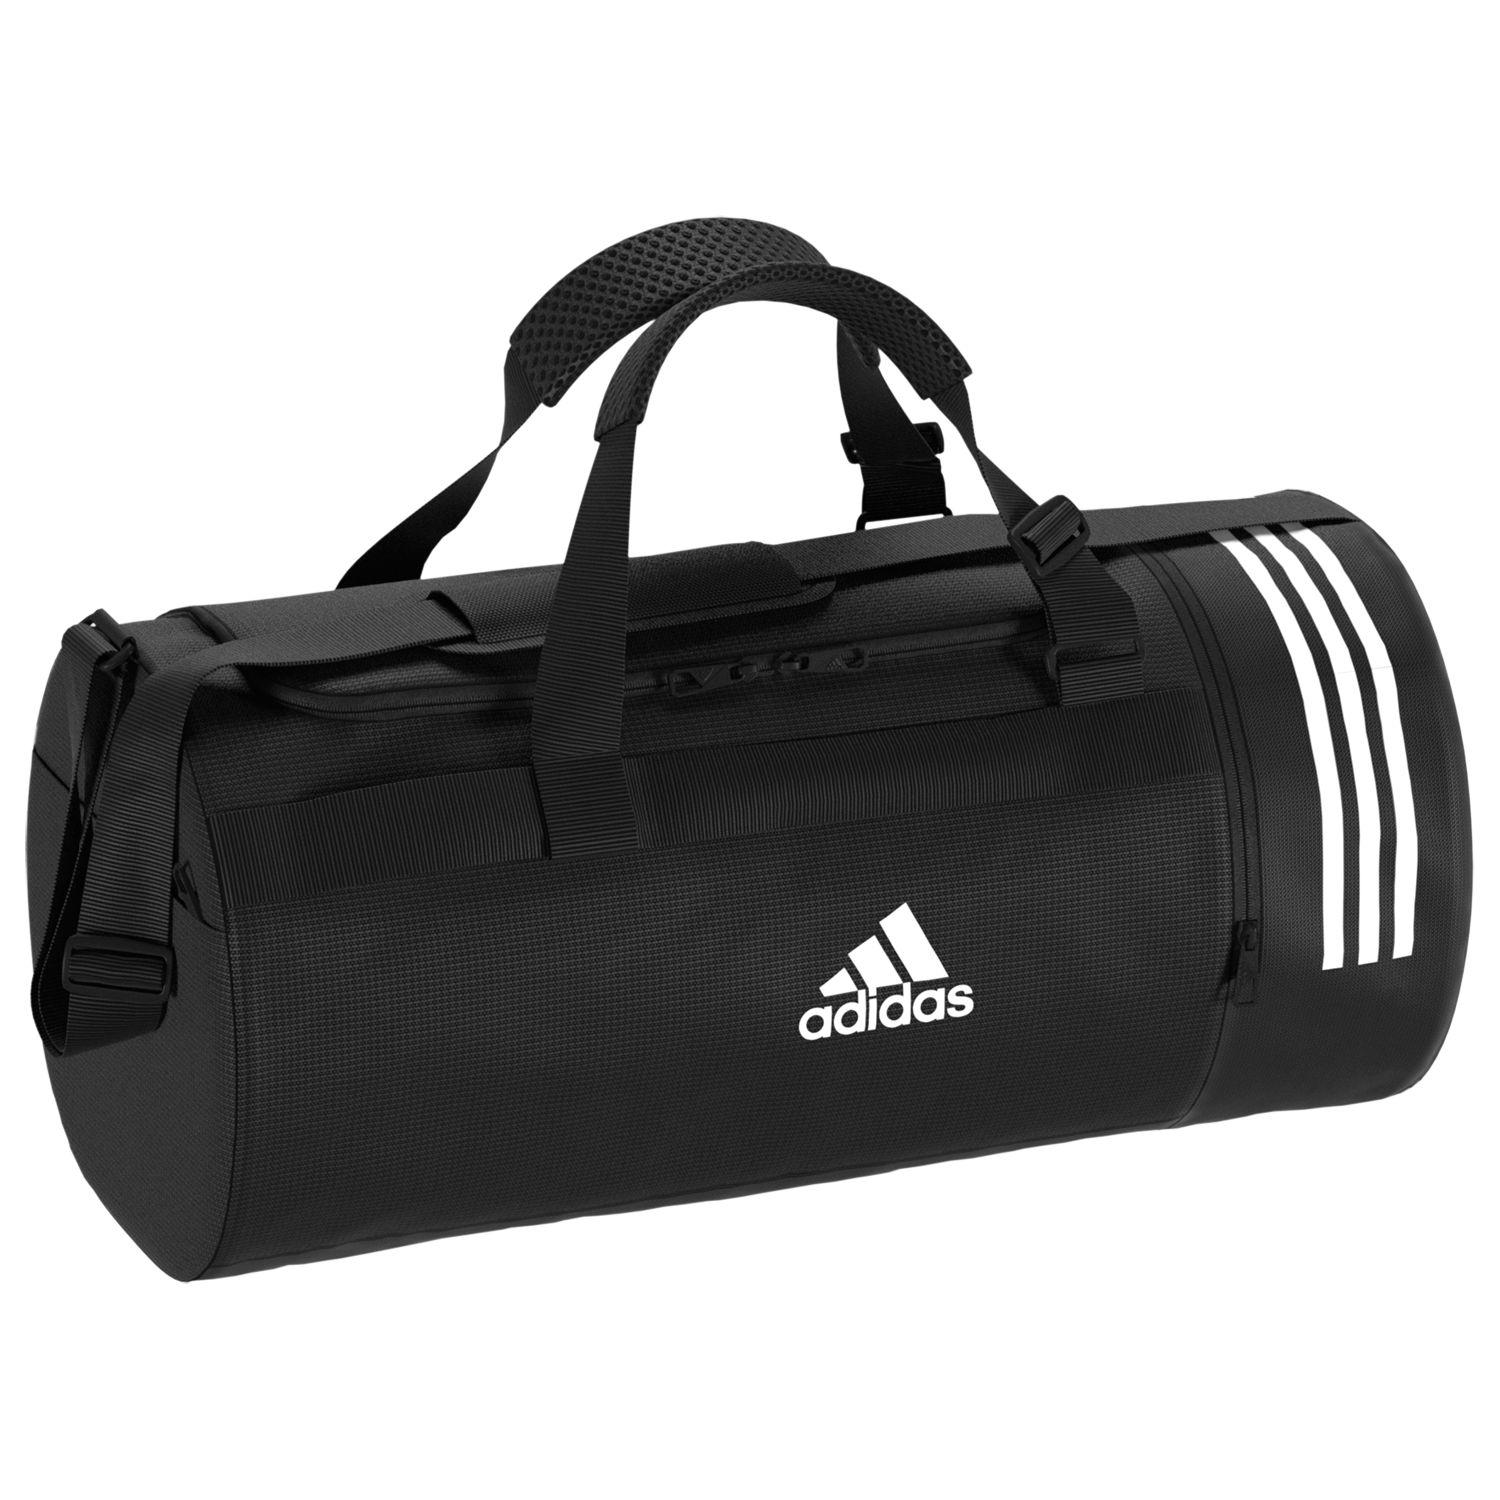 adidas Synthetic Convertible 3-stripes Duffle Bag in Black for Men - Lyst